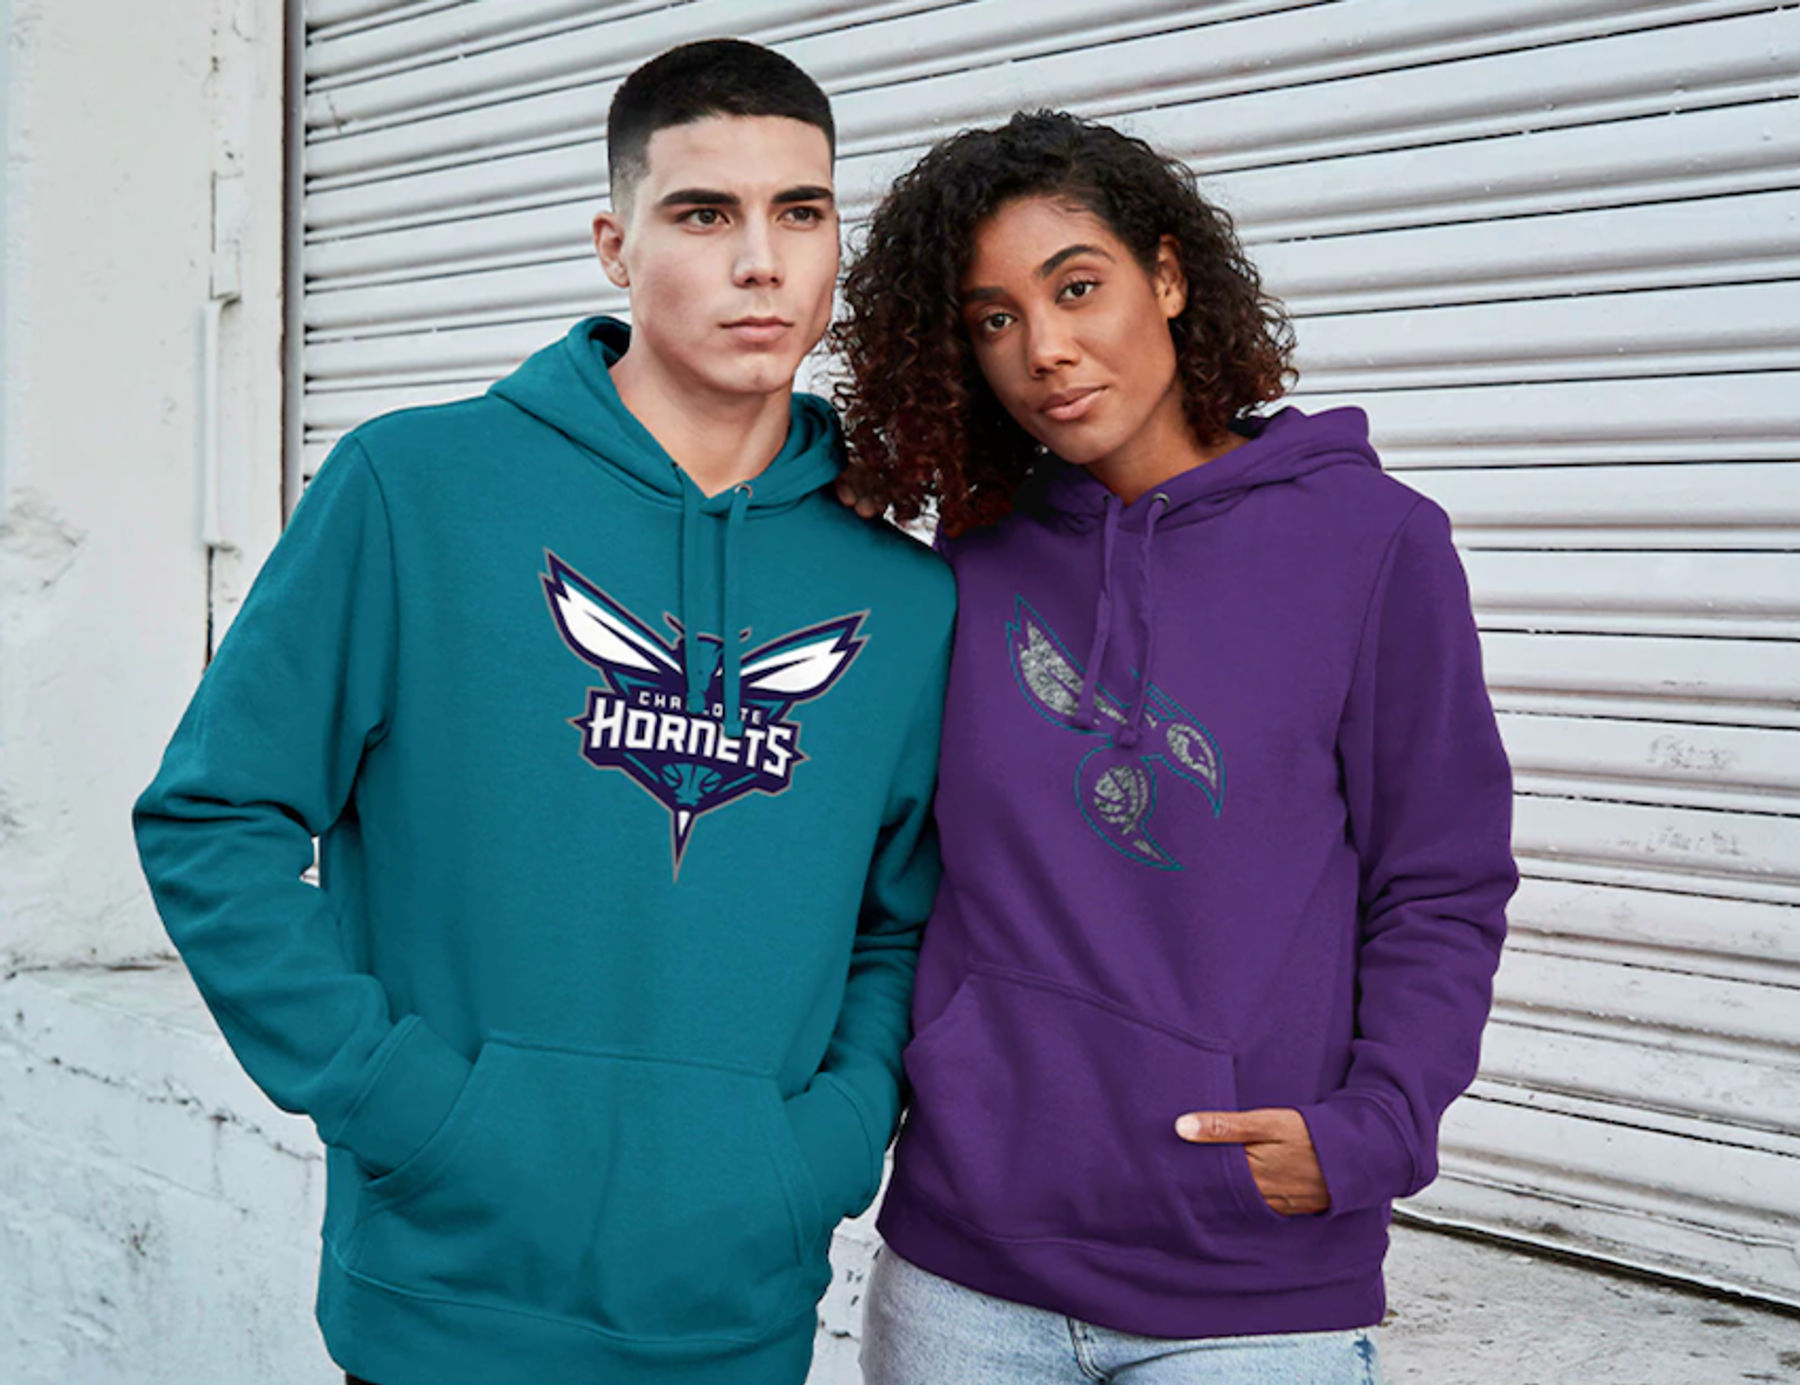 hornets official store